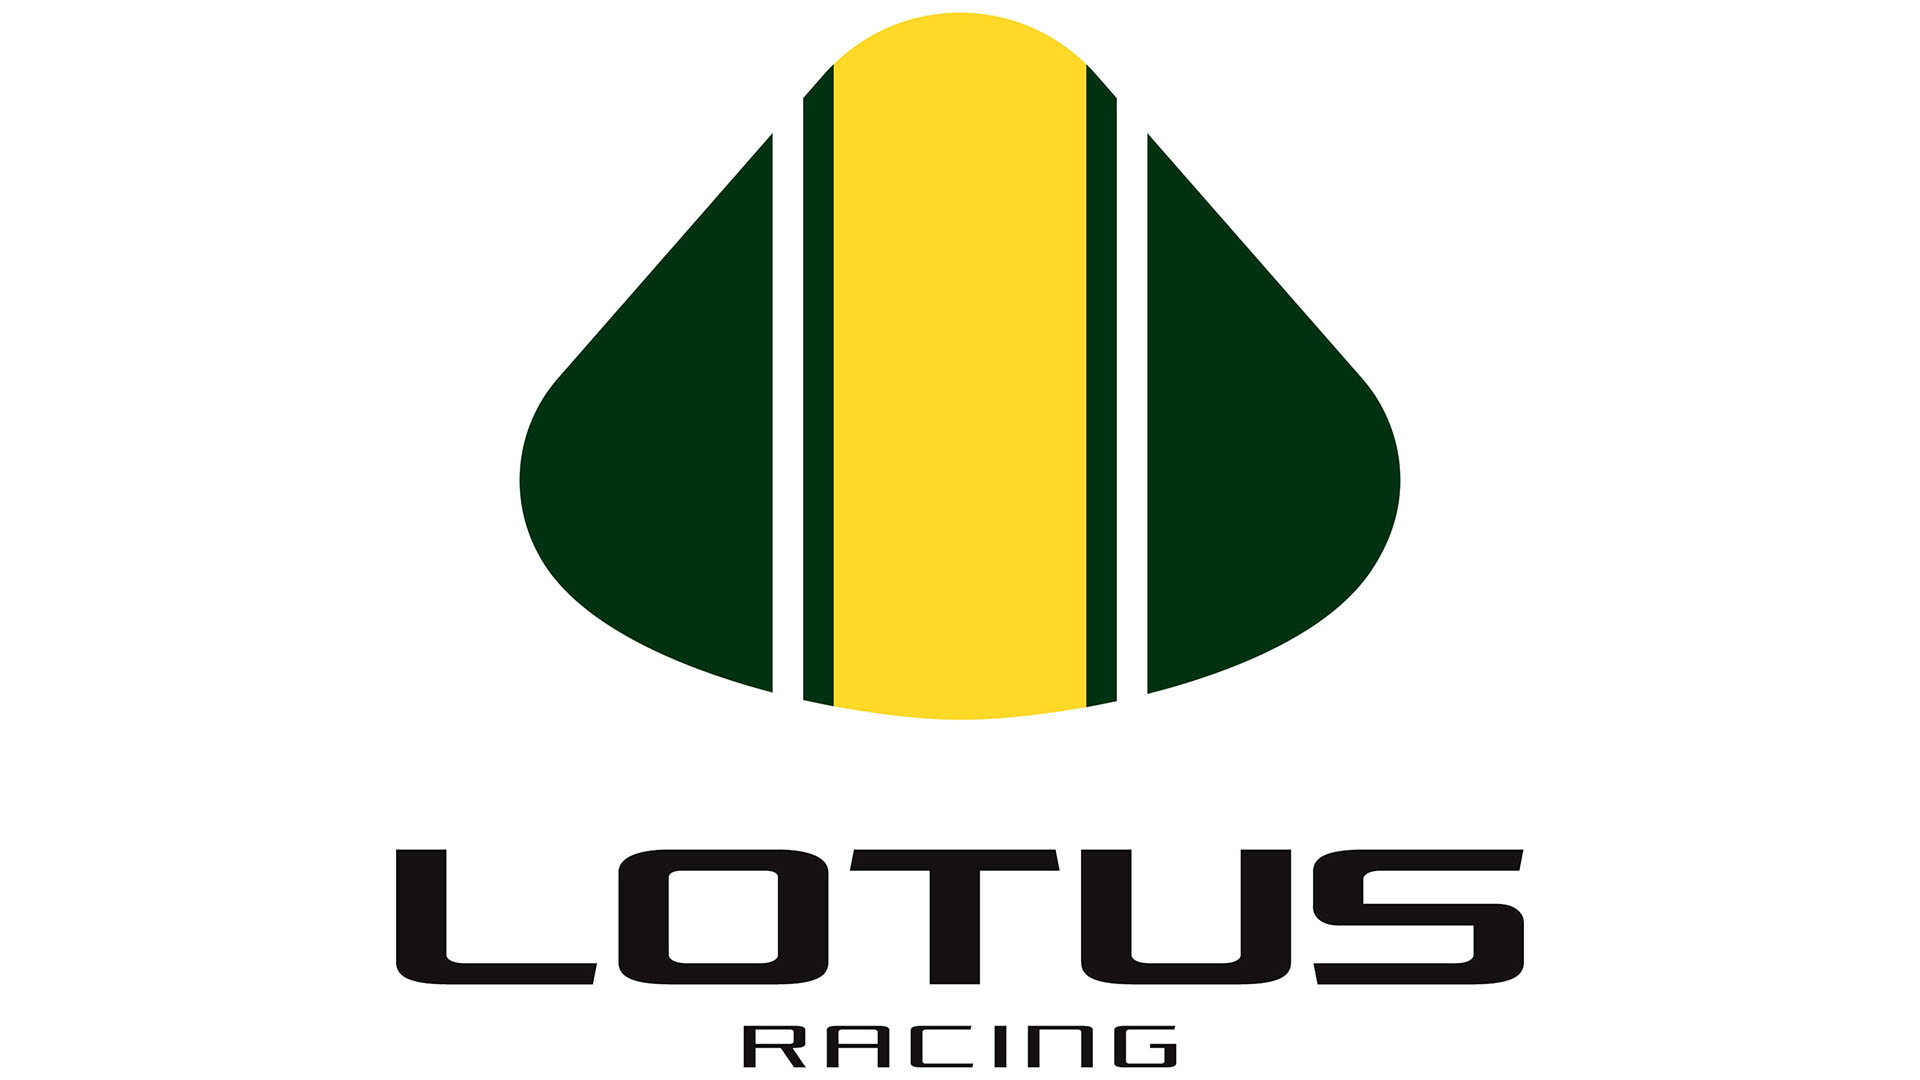 Lotus Logo Text and Brand Sign Car Dealership from England Editorial Image  - Image of manufacturer, bordeaux: 249107445